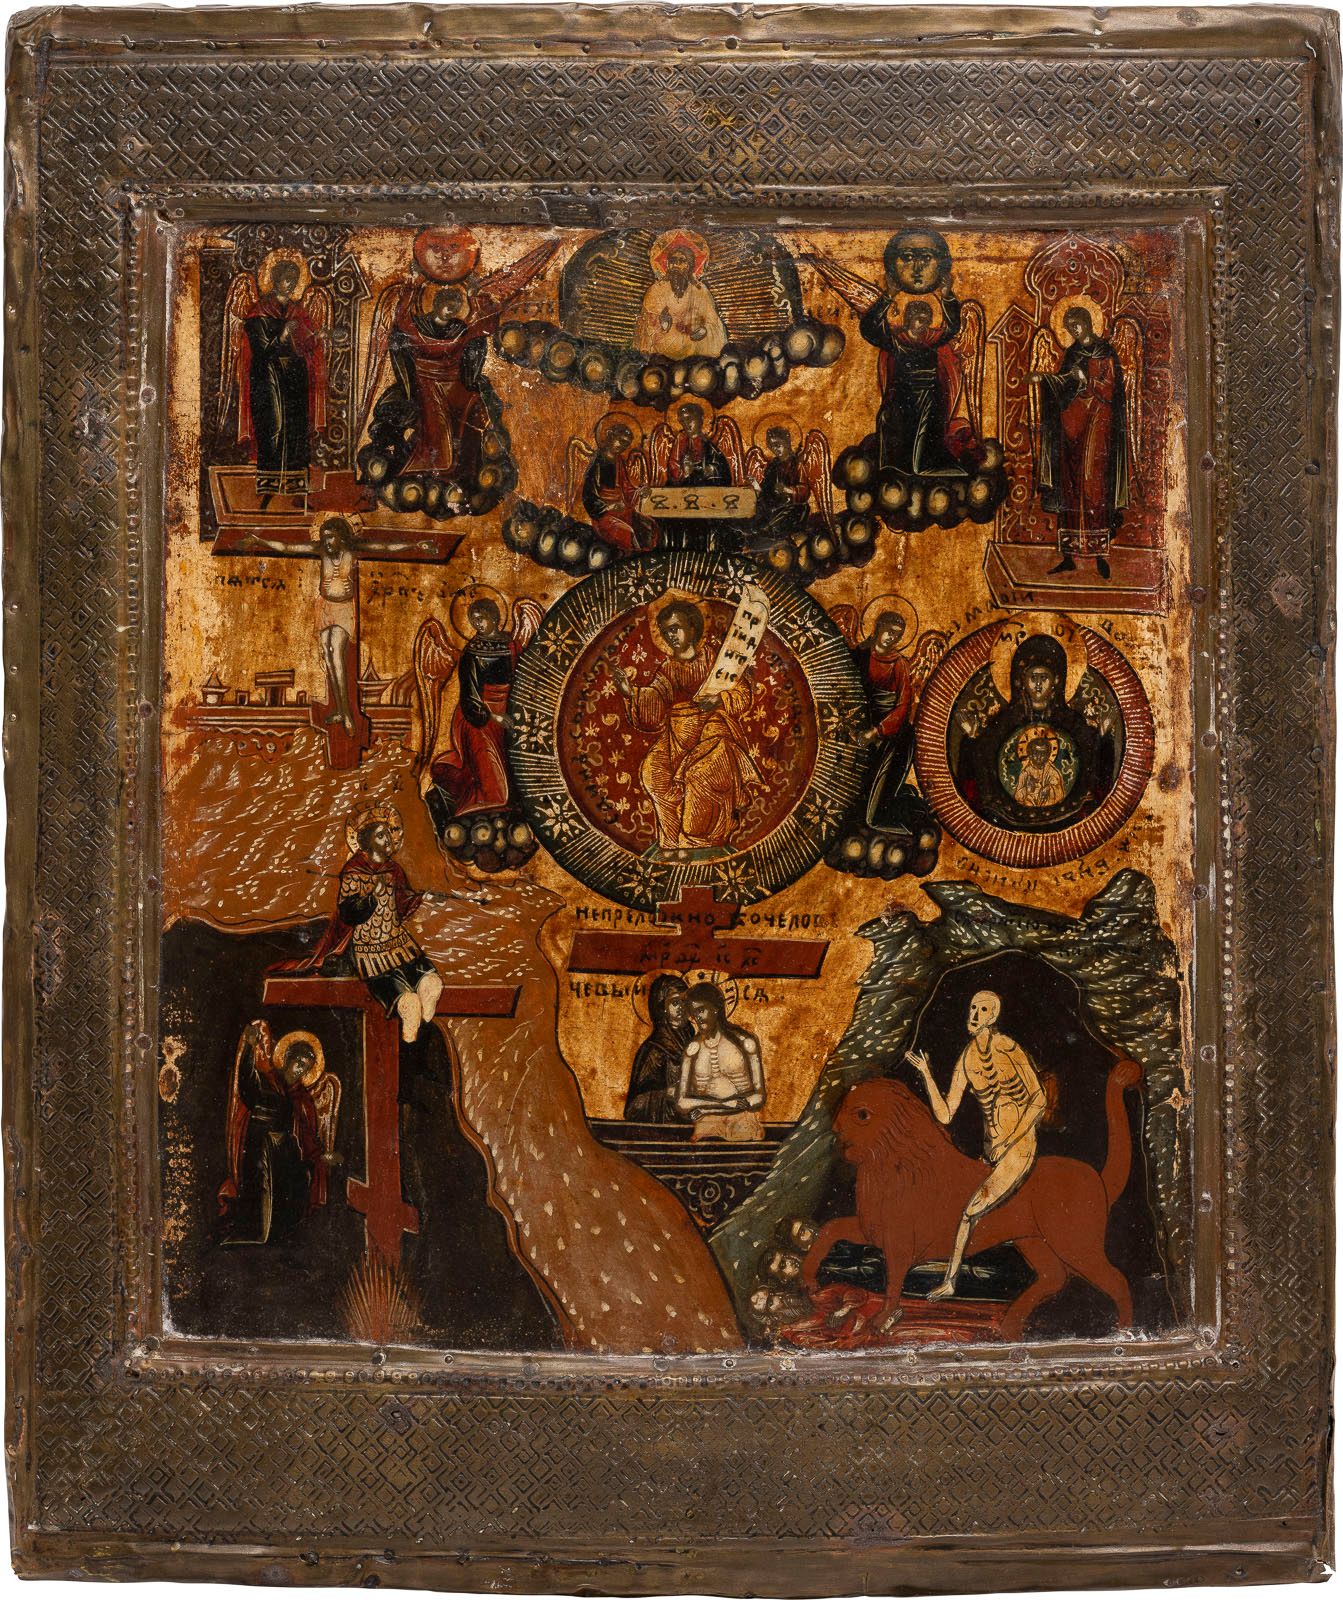 A RARE ICON SHOWING CHRIST 'ONLY BEGOTTEN SON' WITH A BASMA UNA RARA ICONA CHE M&hellip;